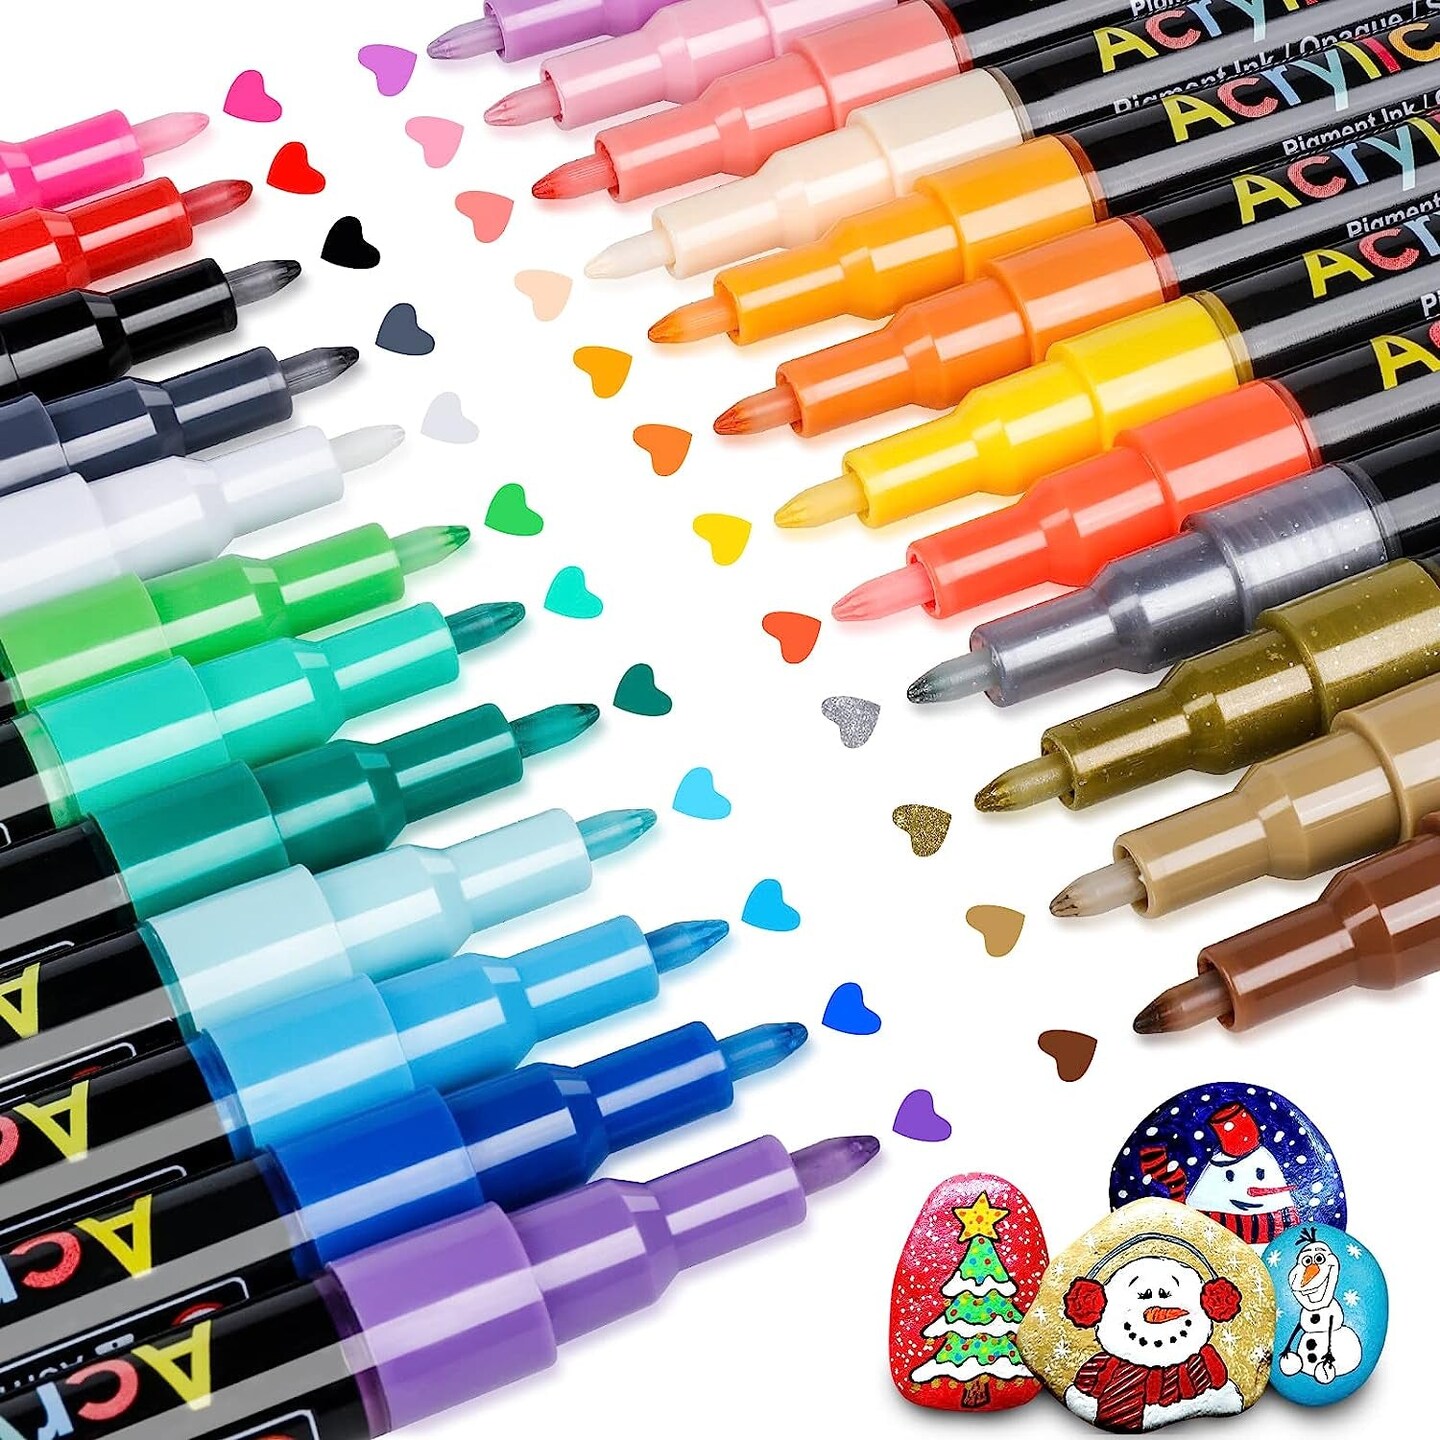 Acrylic Paint Pens Paint Markers Set of 18: Fine Point Paint Pens for Rock  Painting Glass Wood Ceramic Fabric Metal Canvas Easter Eggs Pumpkin Kit